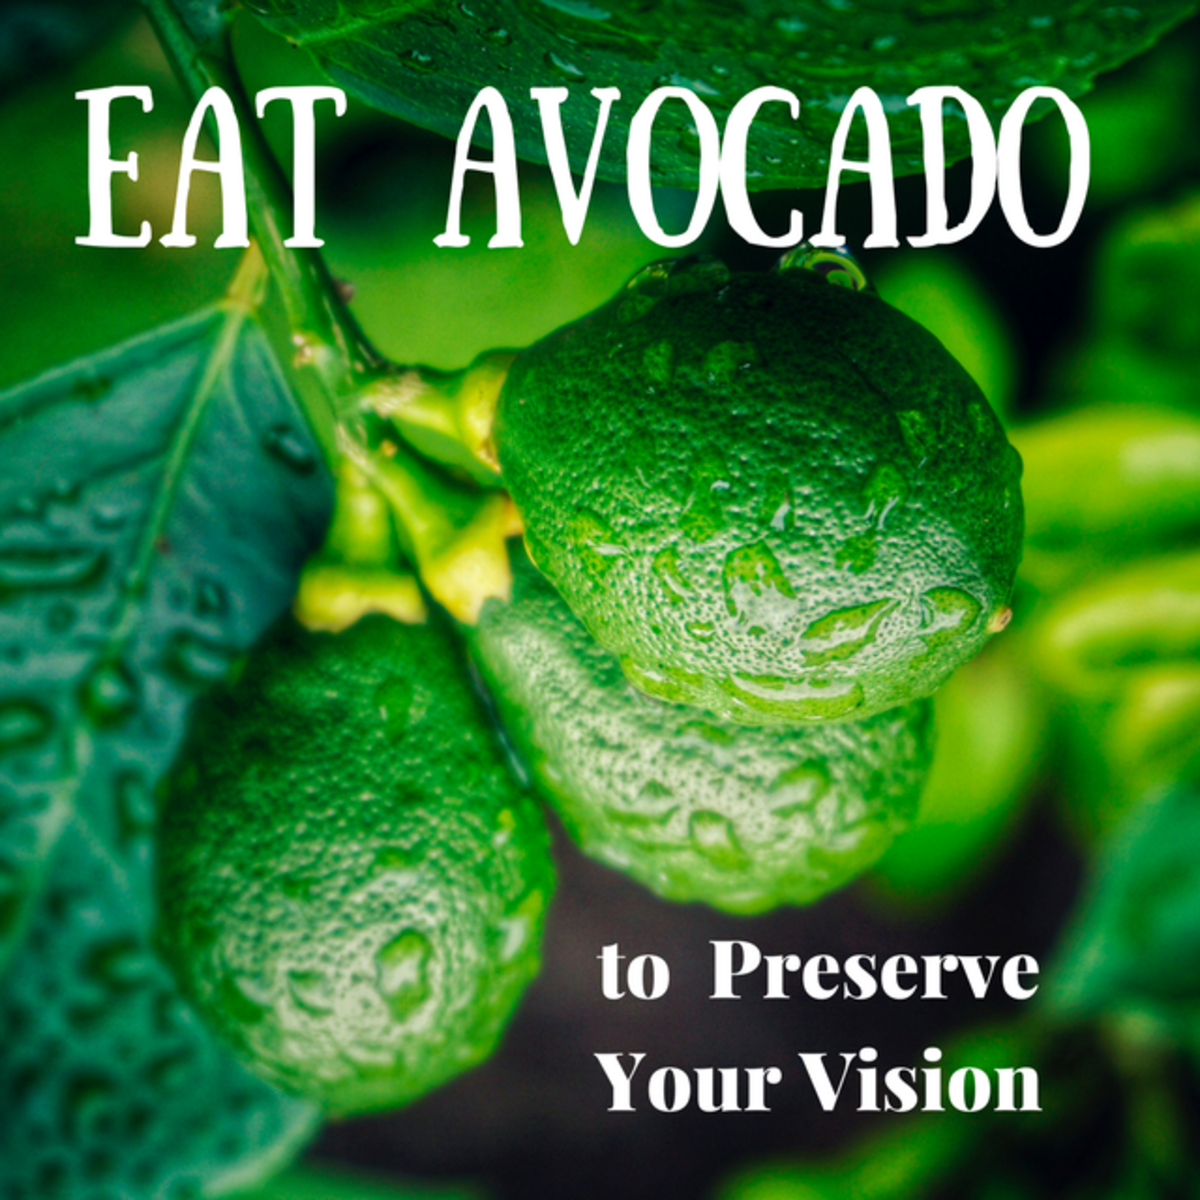 Eat Avocado to Preserve Your Vision